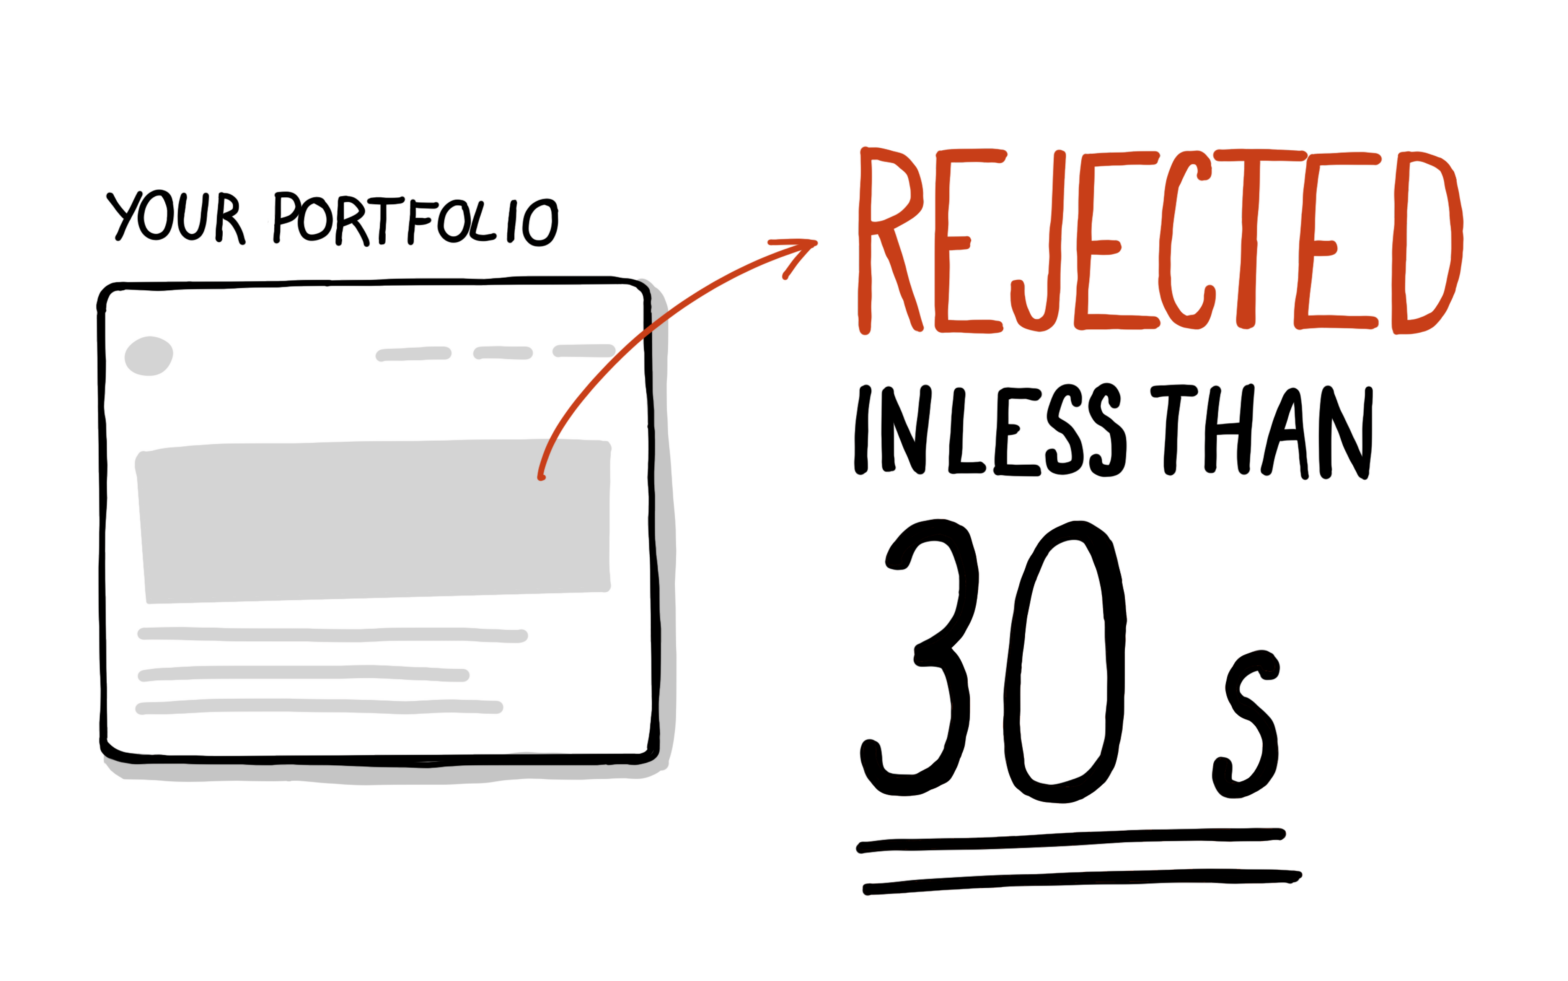 Your portfolio rejected in less than 30 seconds